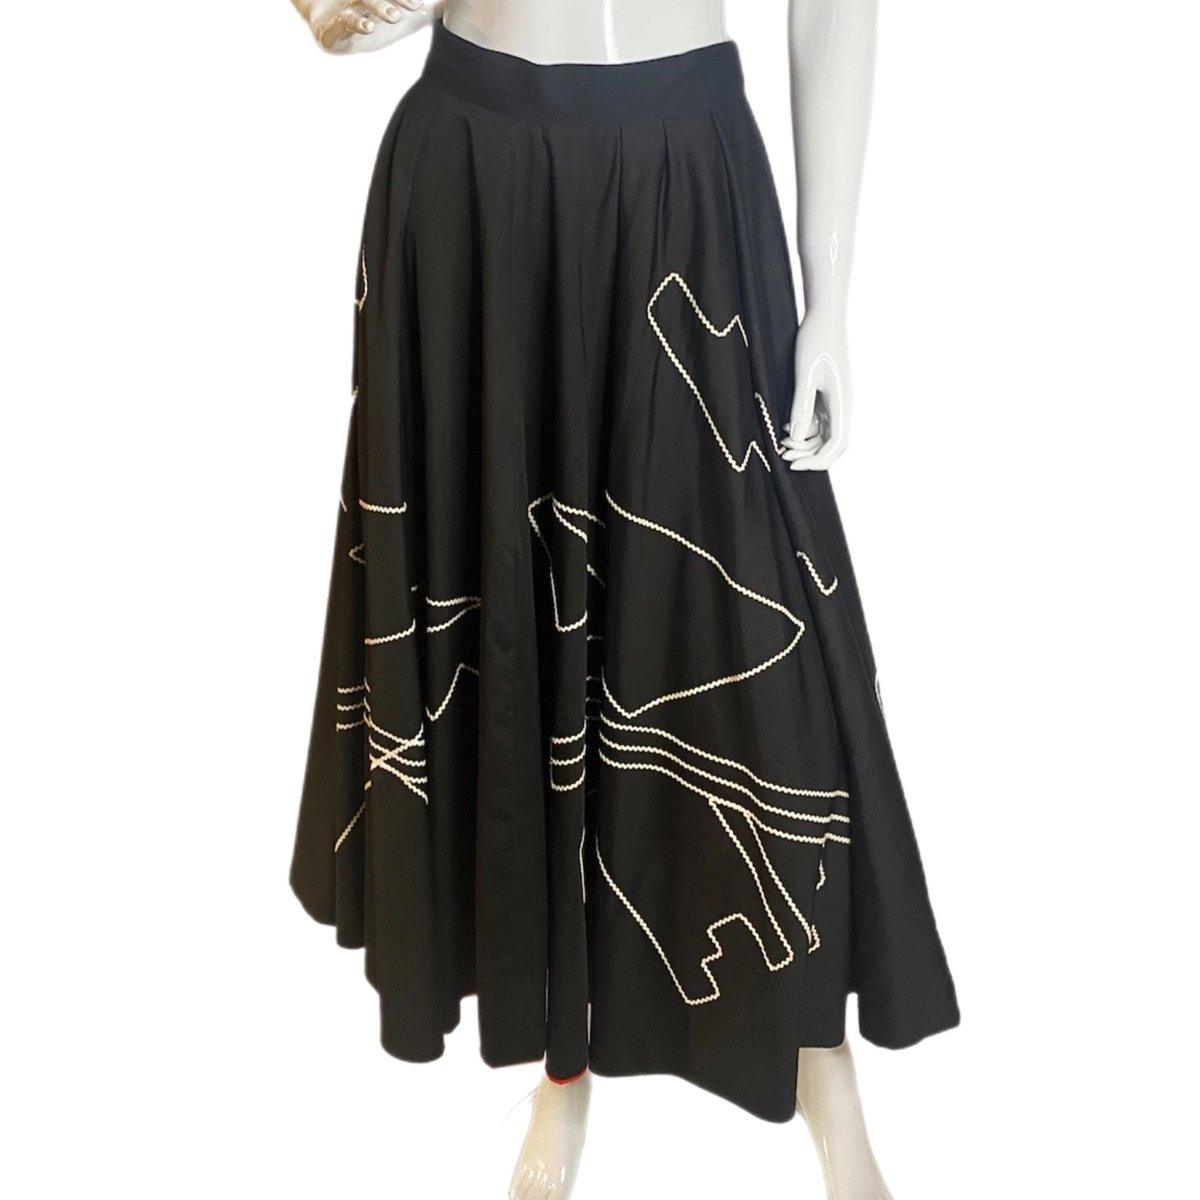 Vintage Circle Skirt with Rick Rack Shapes - Nataly Aponte